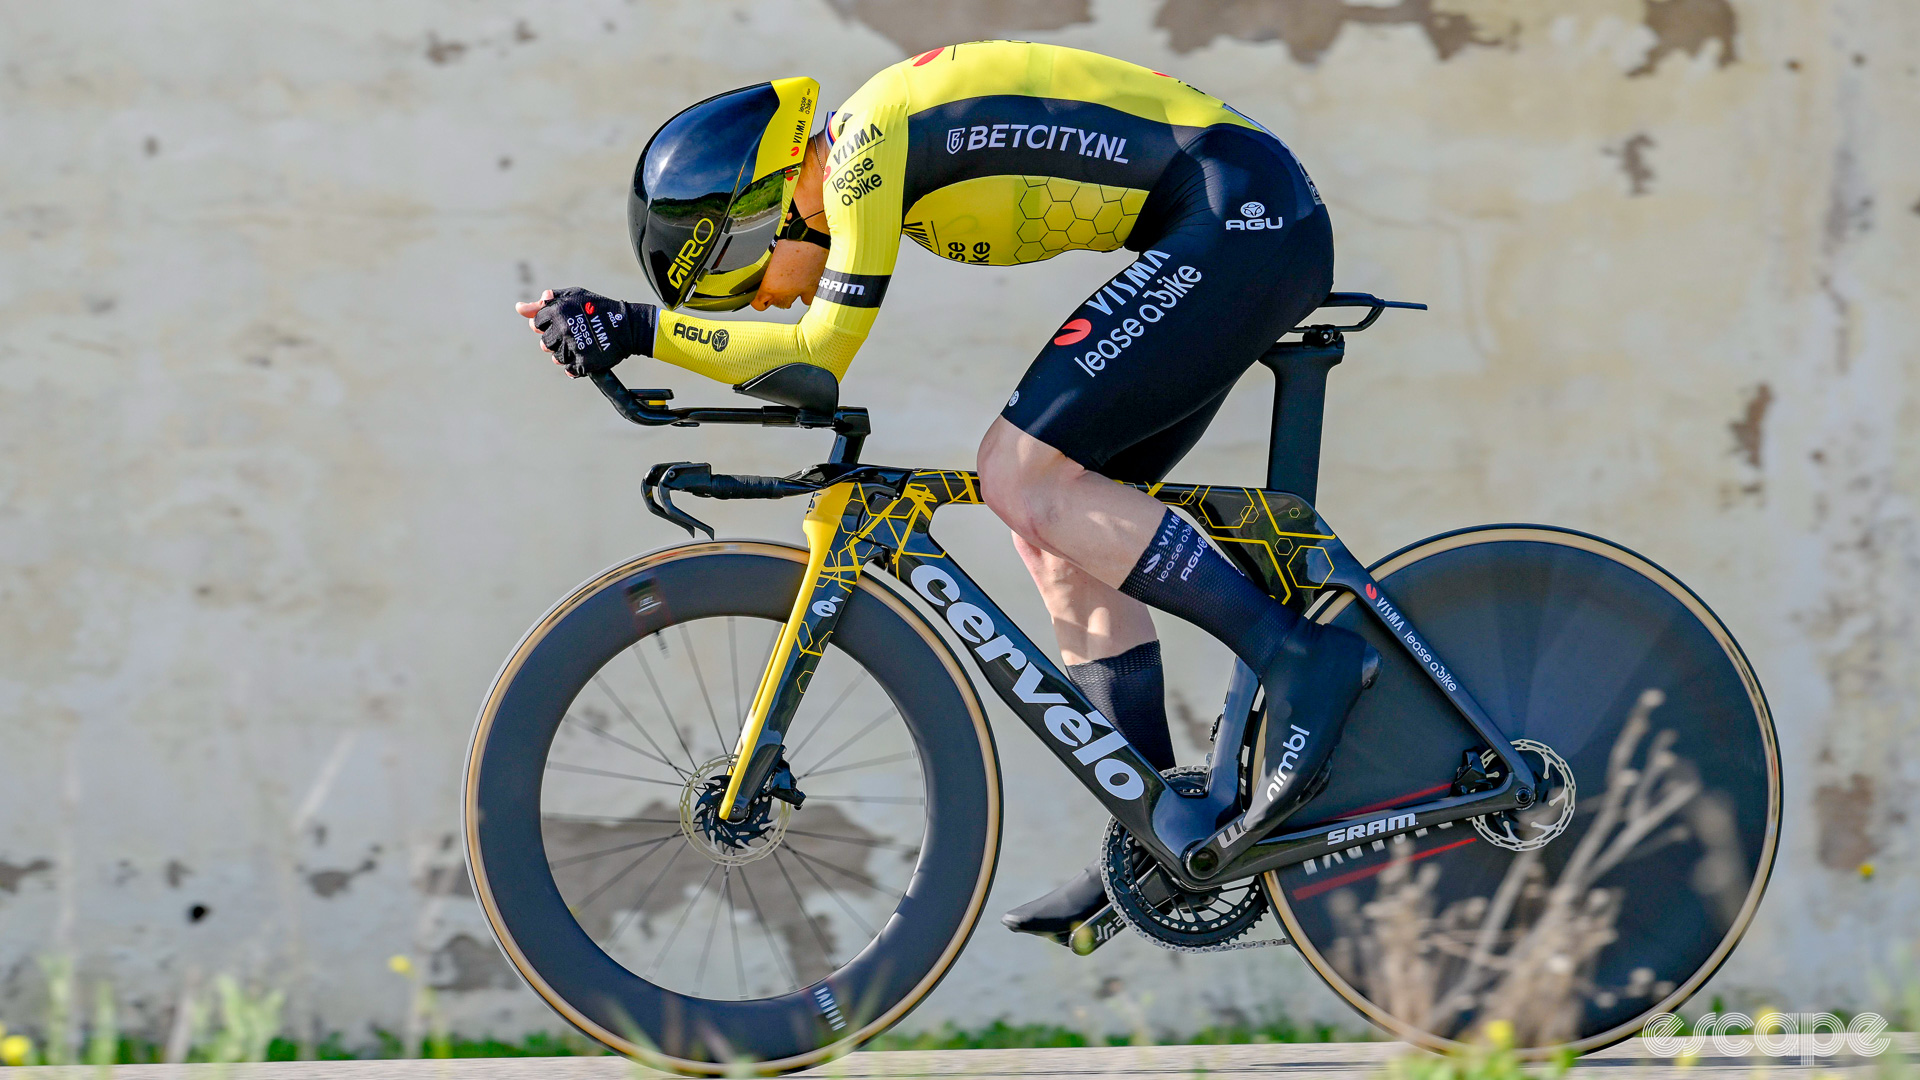 The photo shows a Visma-Lease a Bike rider racing on what appears to be a new Cervelo P5.